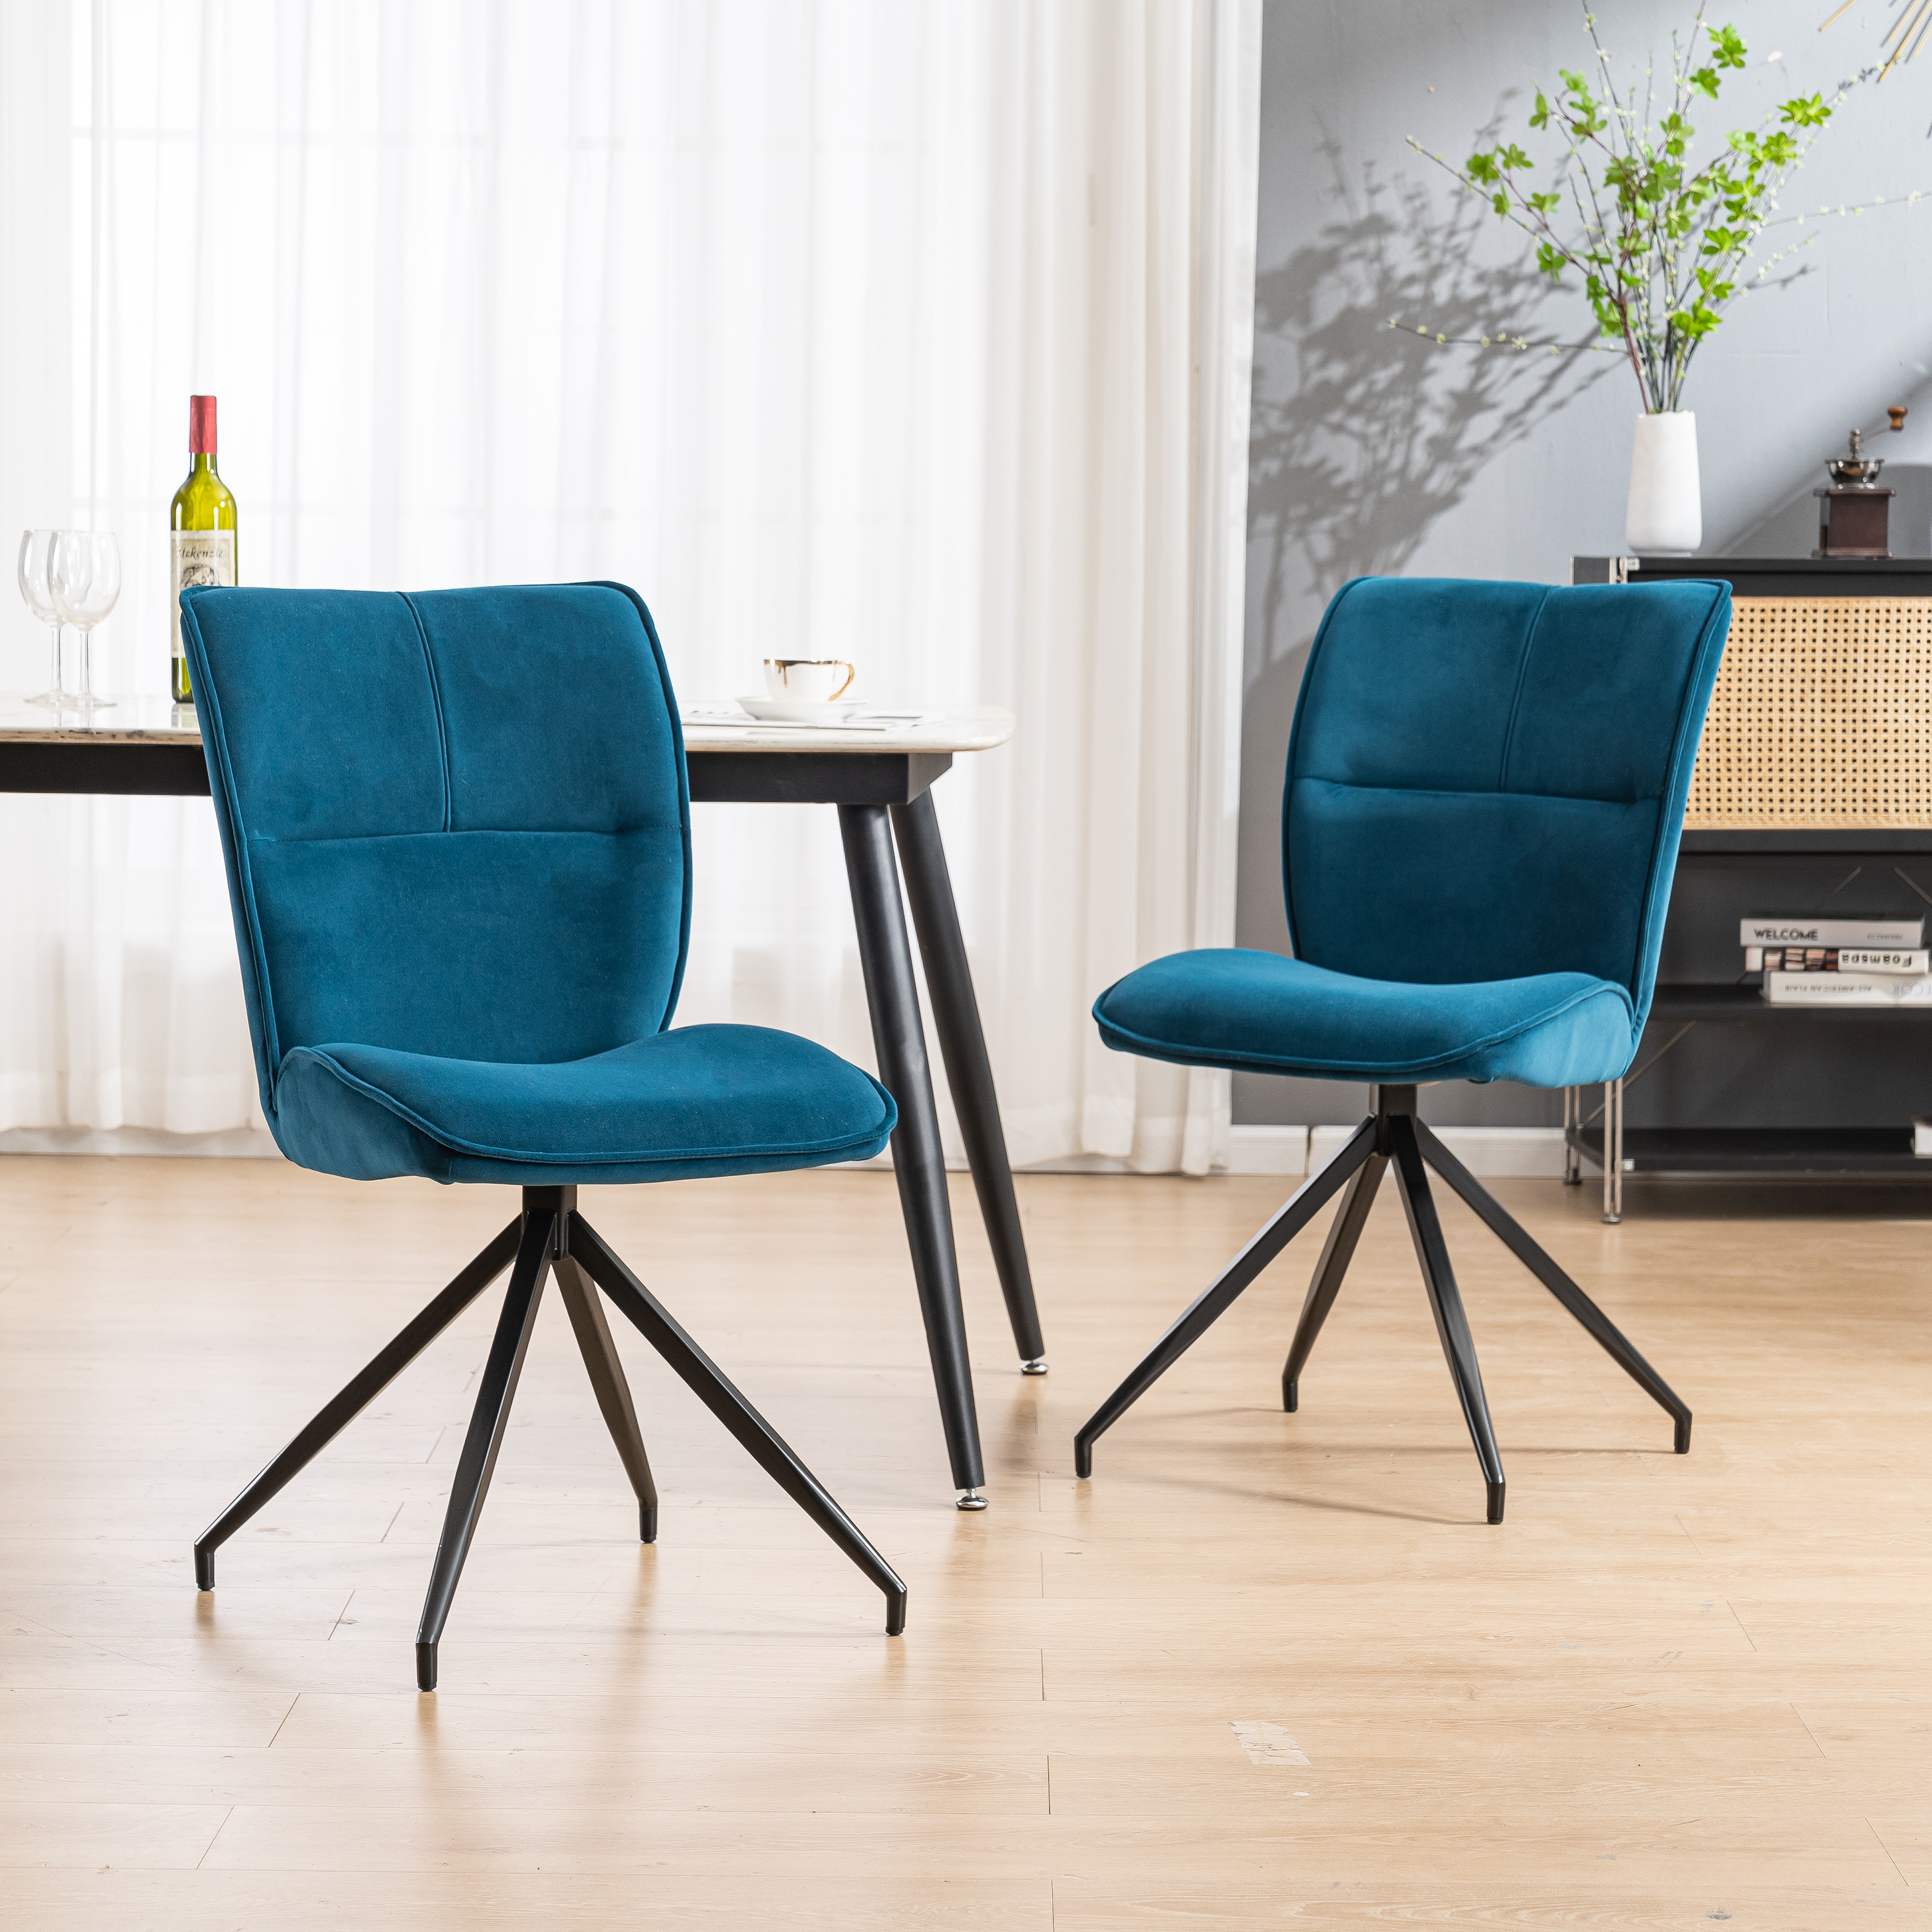  How to Choose a Style of Dining Chair 